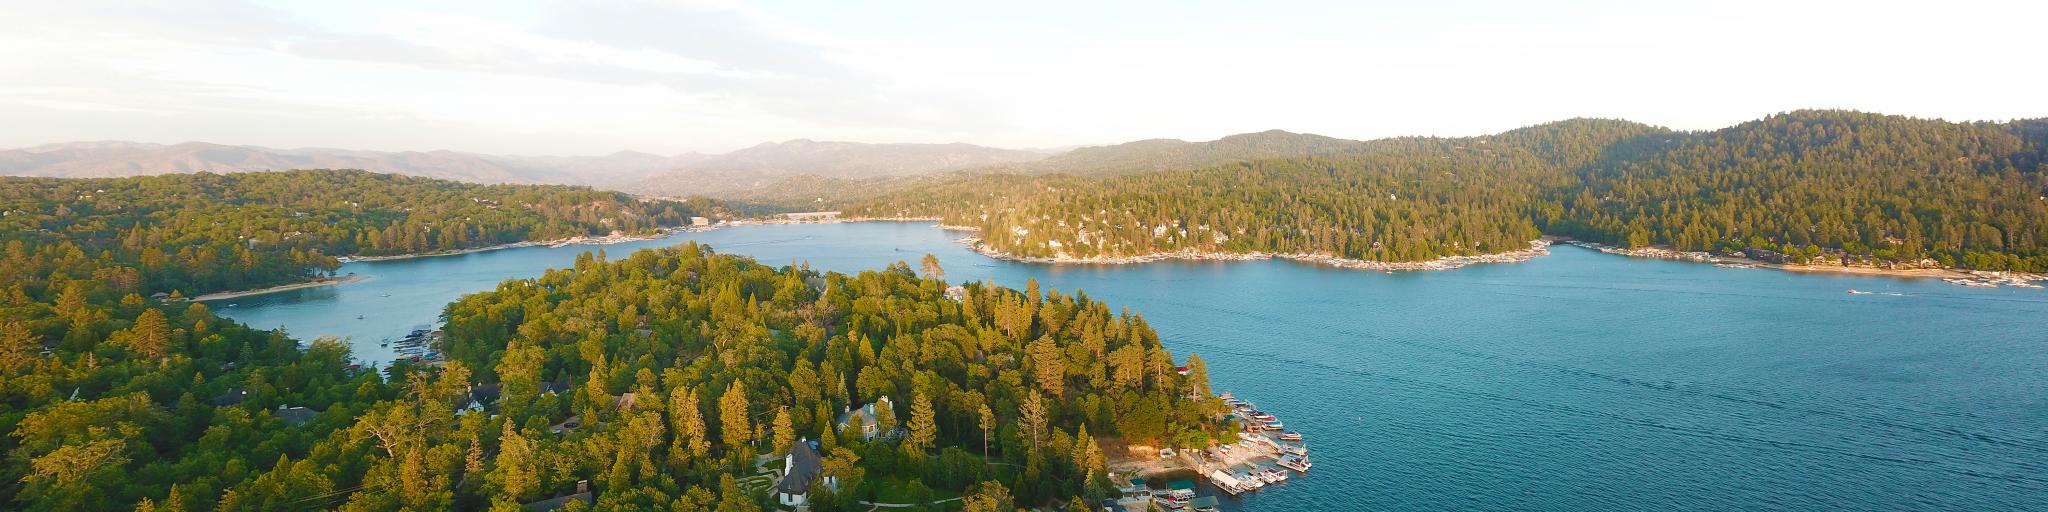 Lake Arrowhead is a perfect destination for a day trip from Los Angeles.